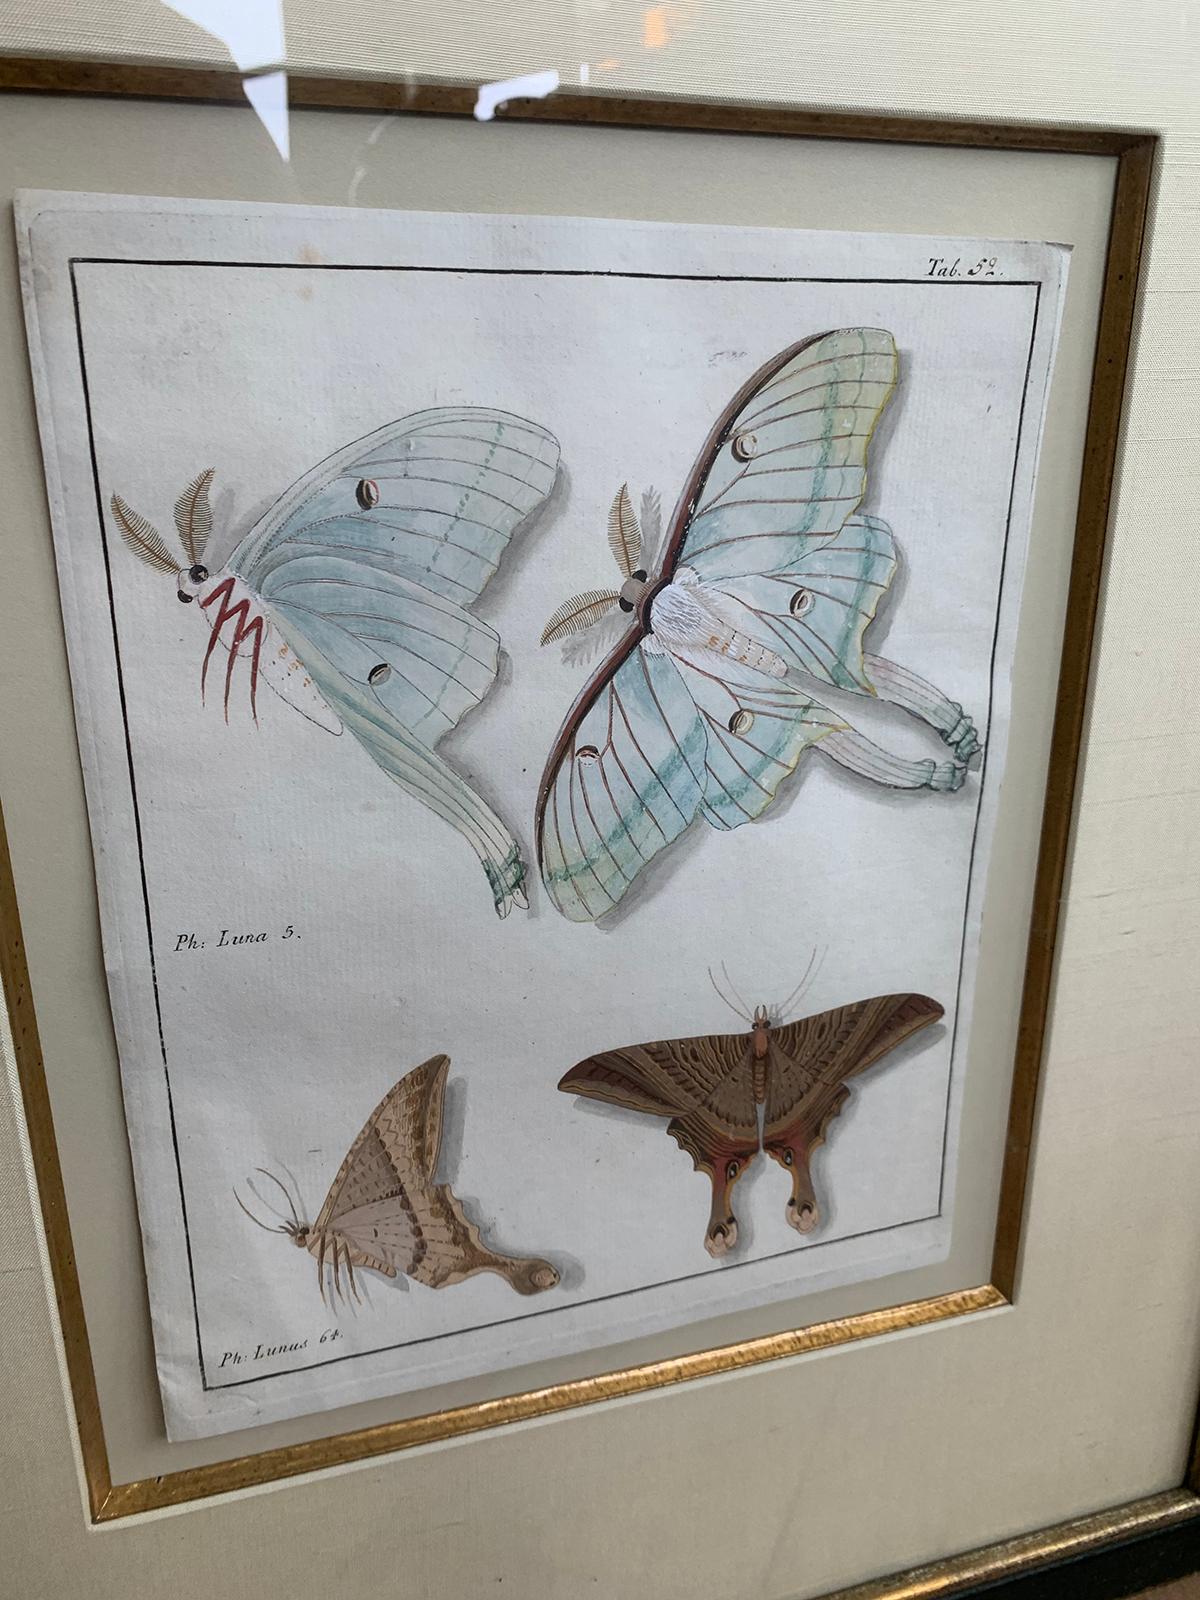 Wood 19th Century Engraving of Two Butterfly Species in Custom Frame